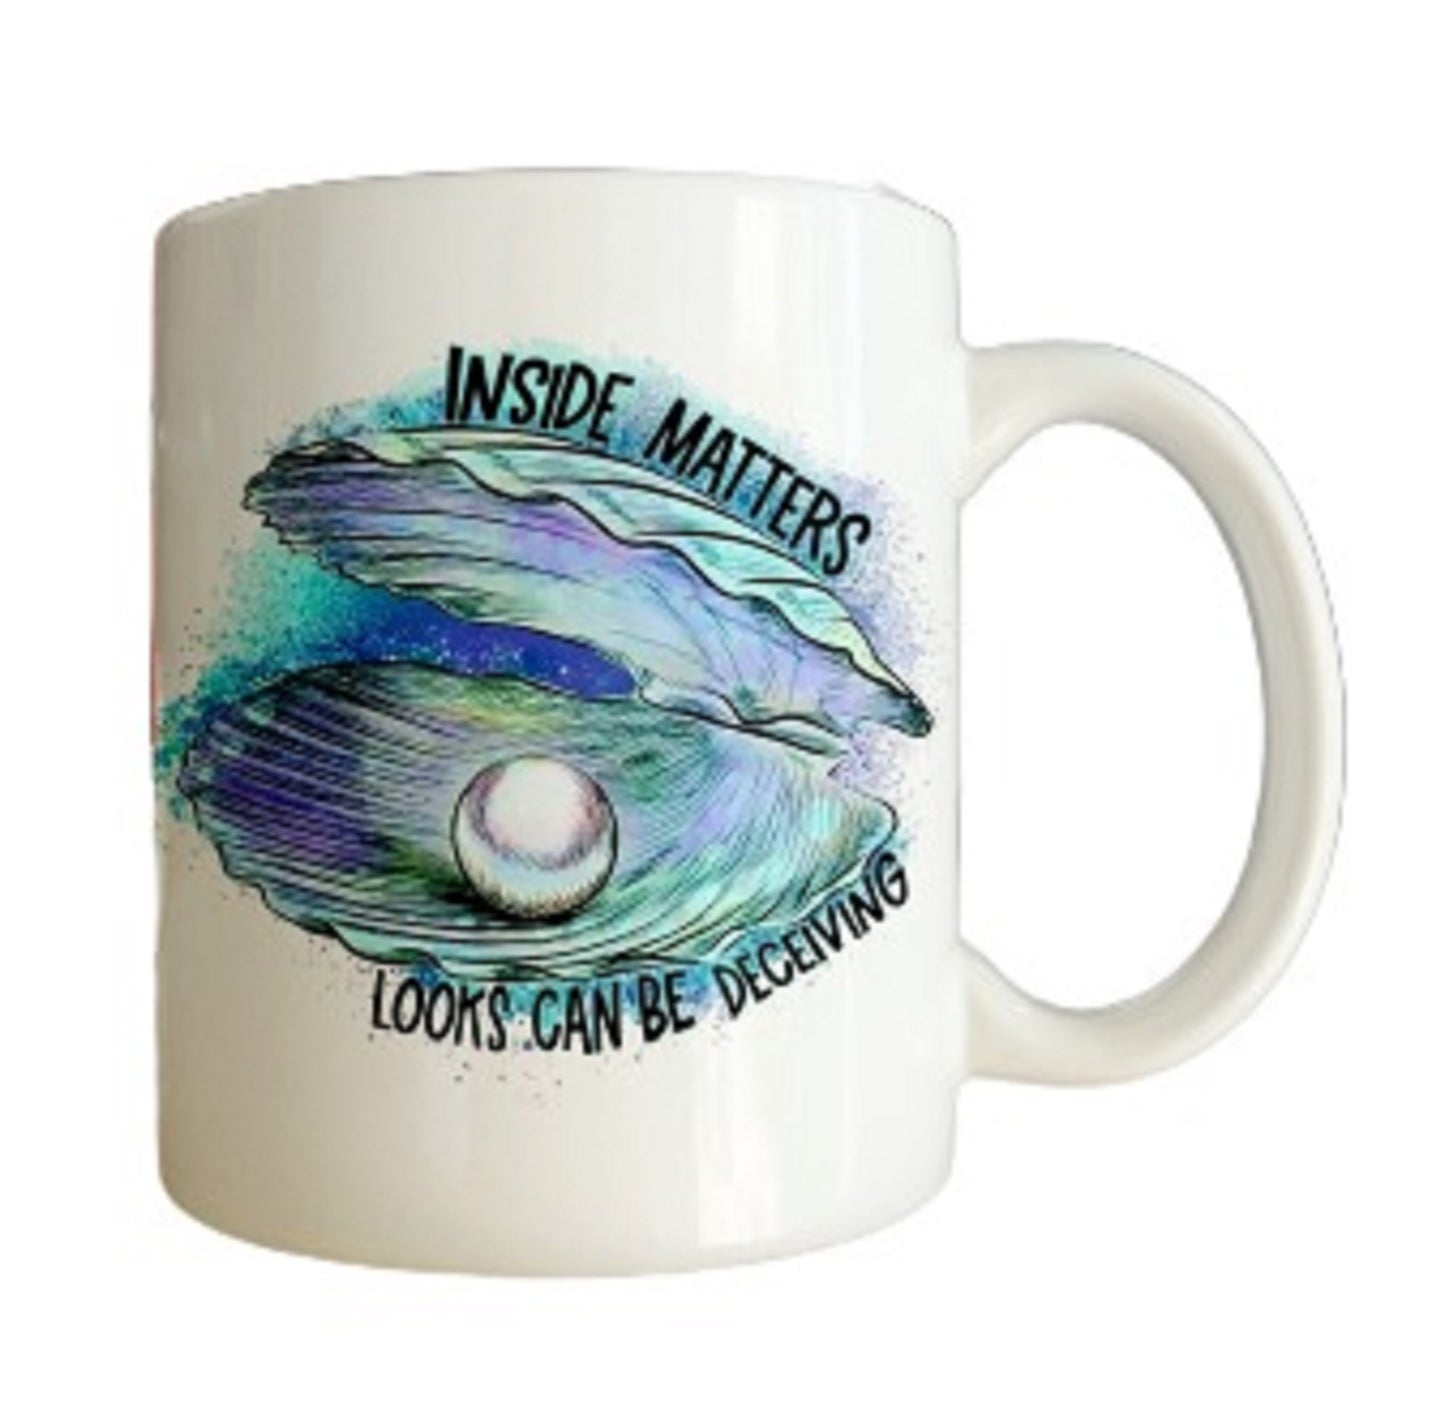  Inside Matters Looks Can Be Deceiving Mug by Free Spirit Accessories sold by Free Spirit Accessories